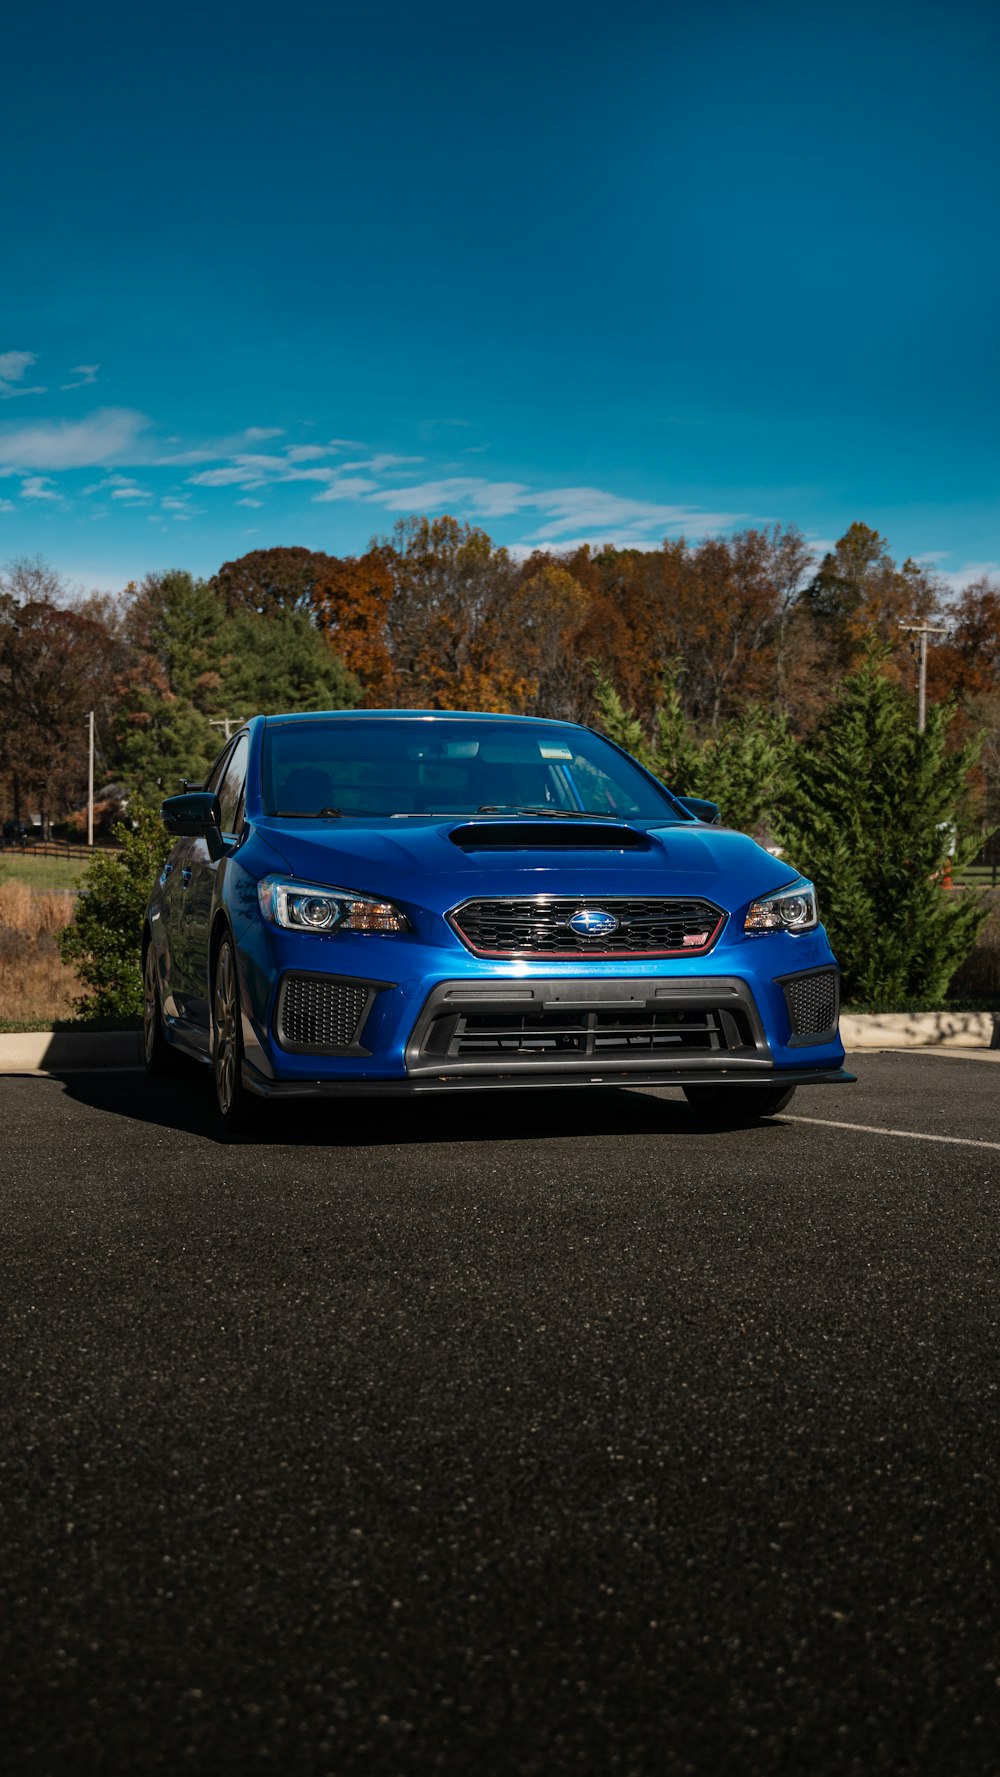 a blue subarunt is parked in a parking lot